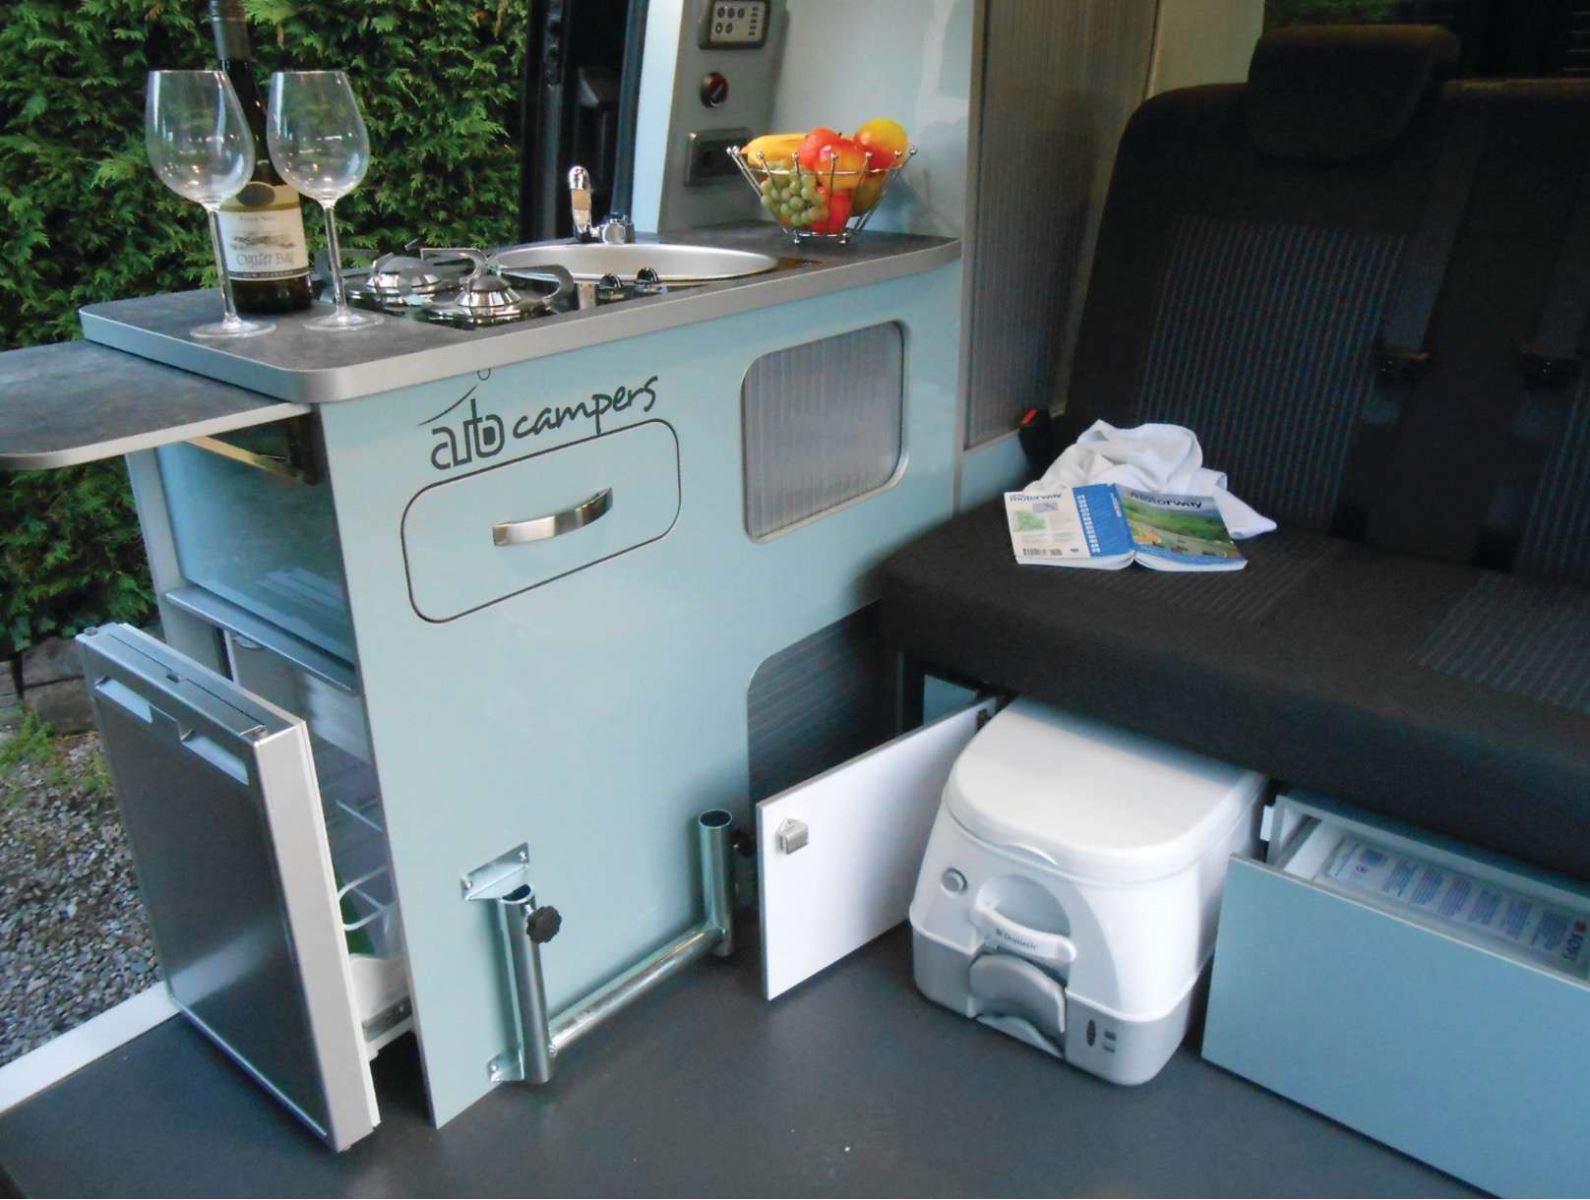 A portable toilet drawer inside of an Auto Campers leisure van